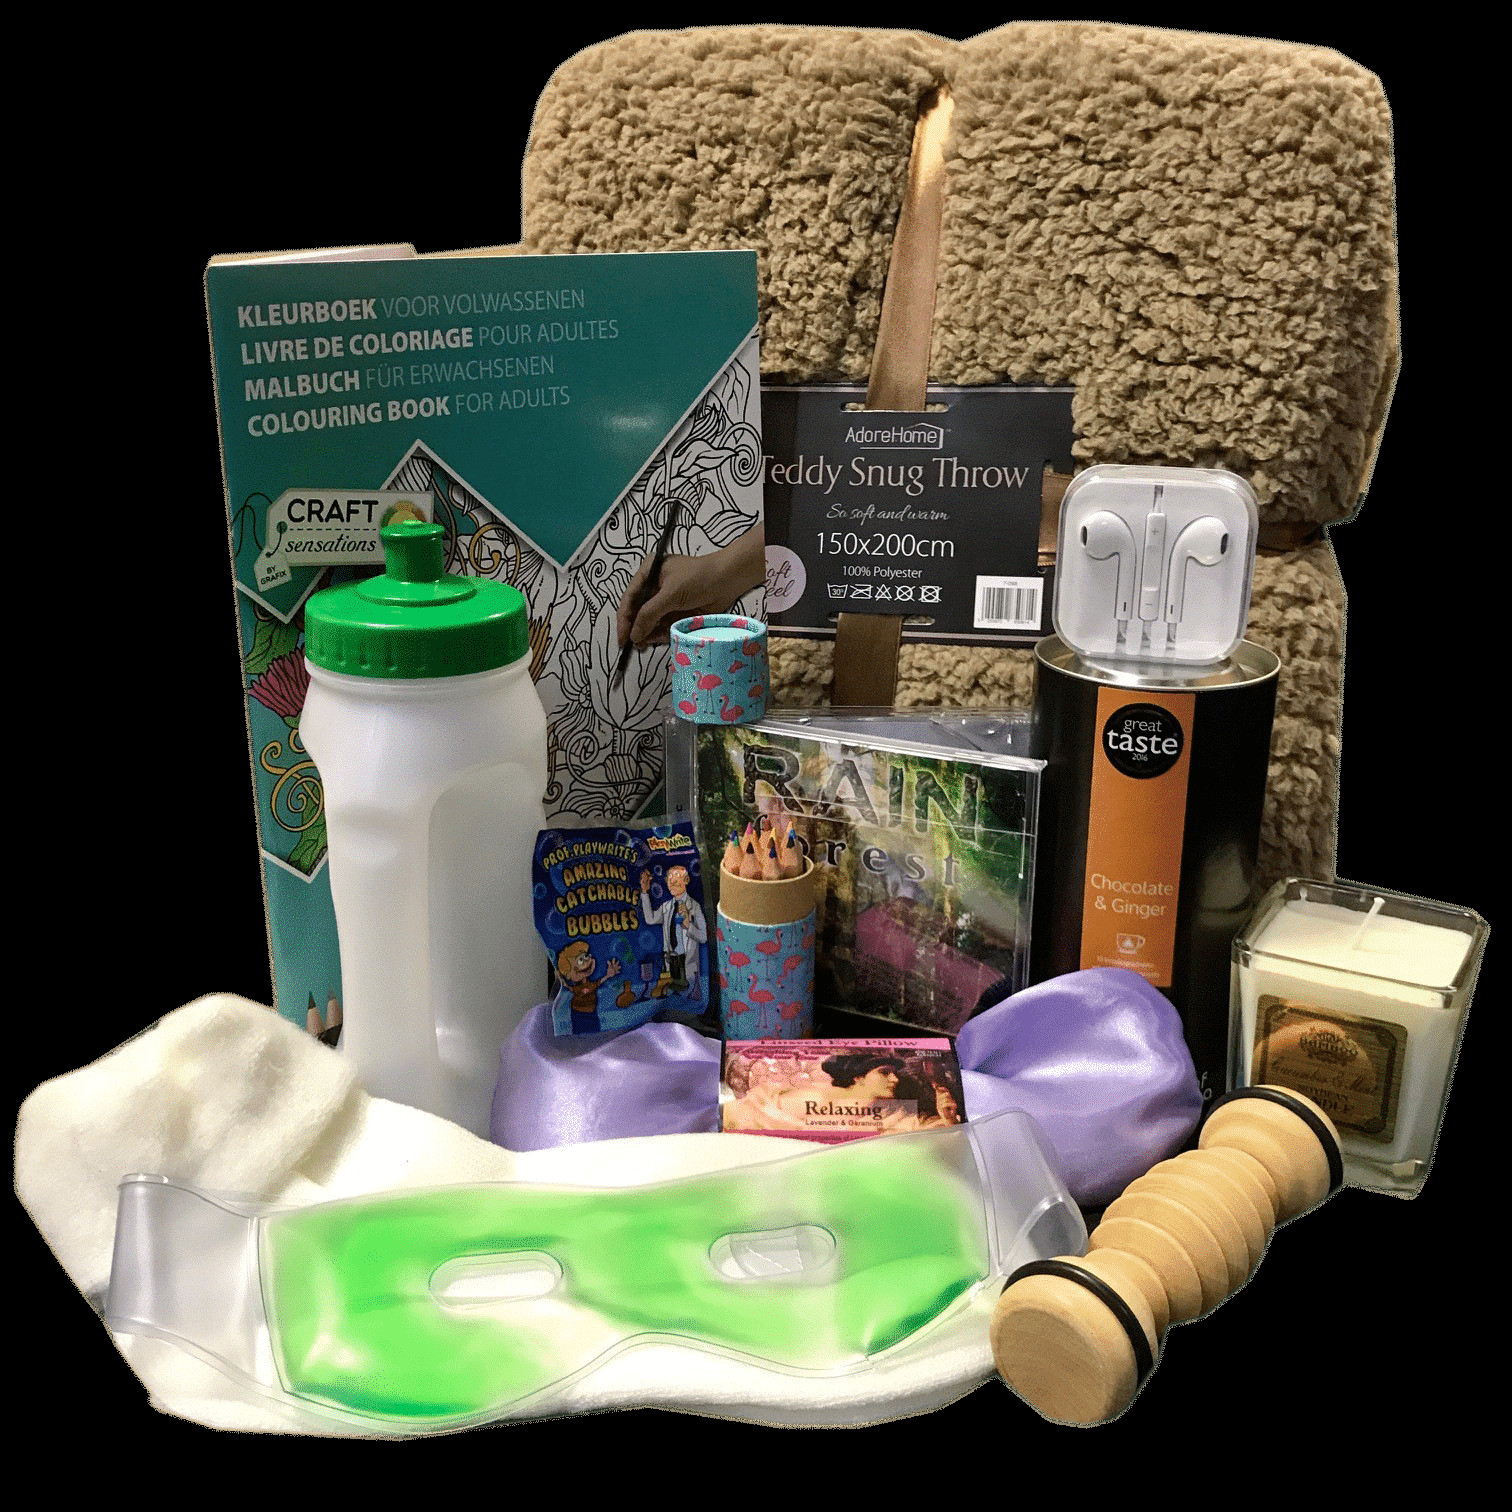 Chemotherapy Gift Ideas
 Cancer fort Gift Hamper Diagnosis Convalescing or